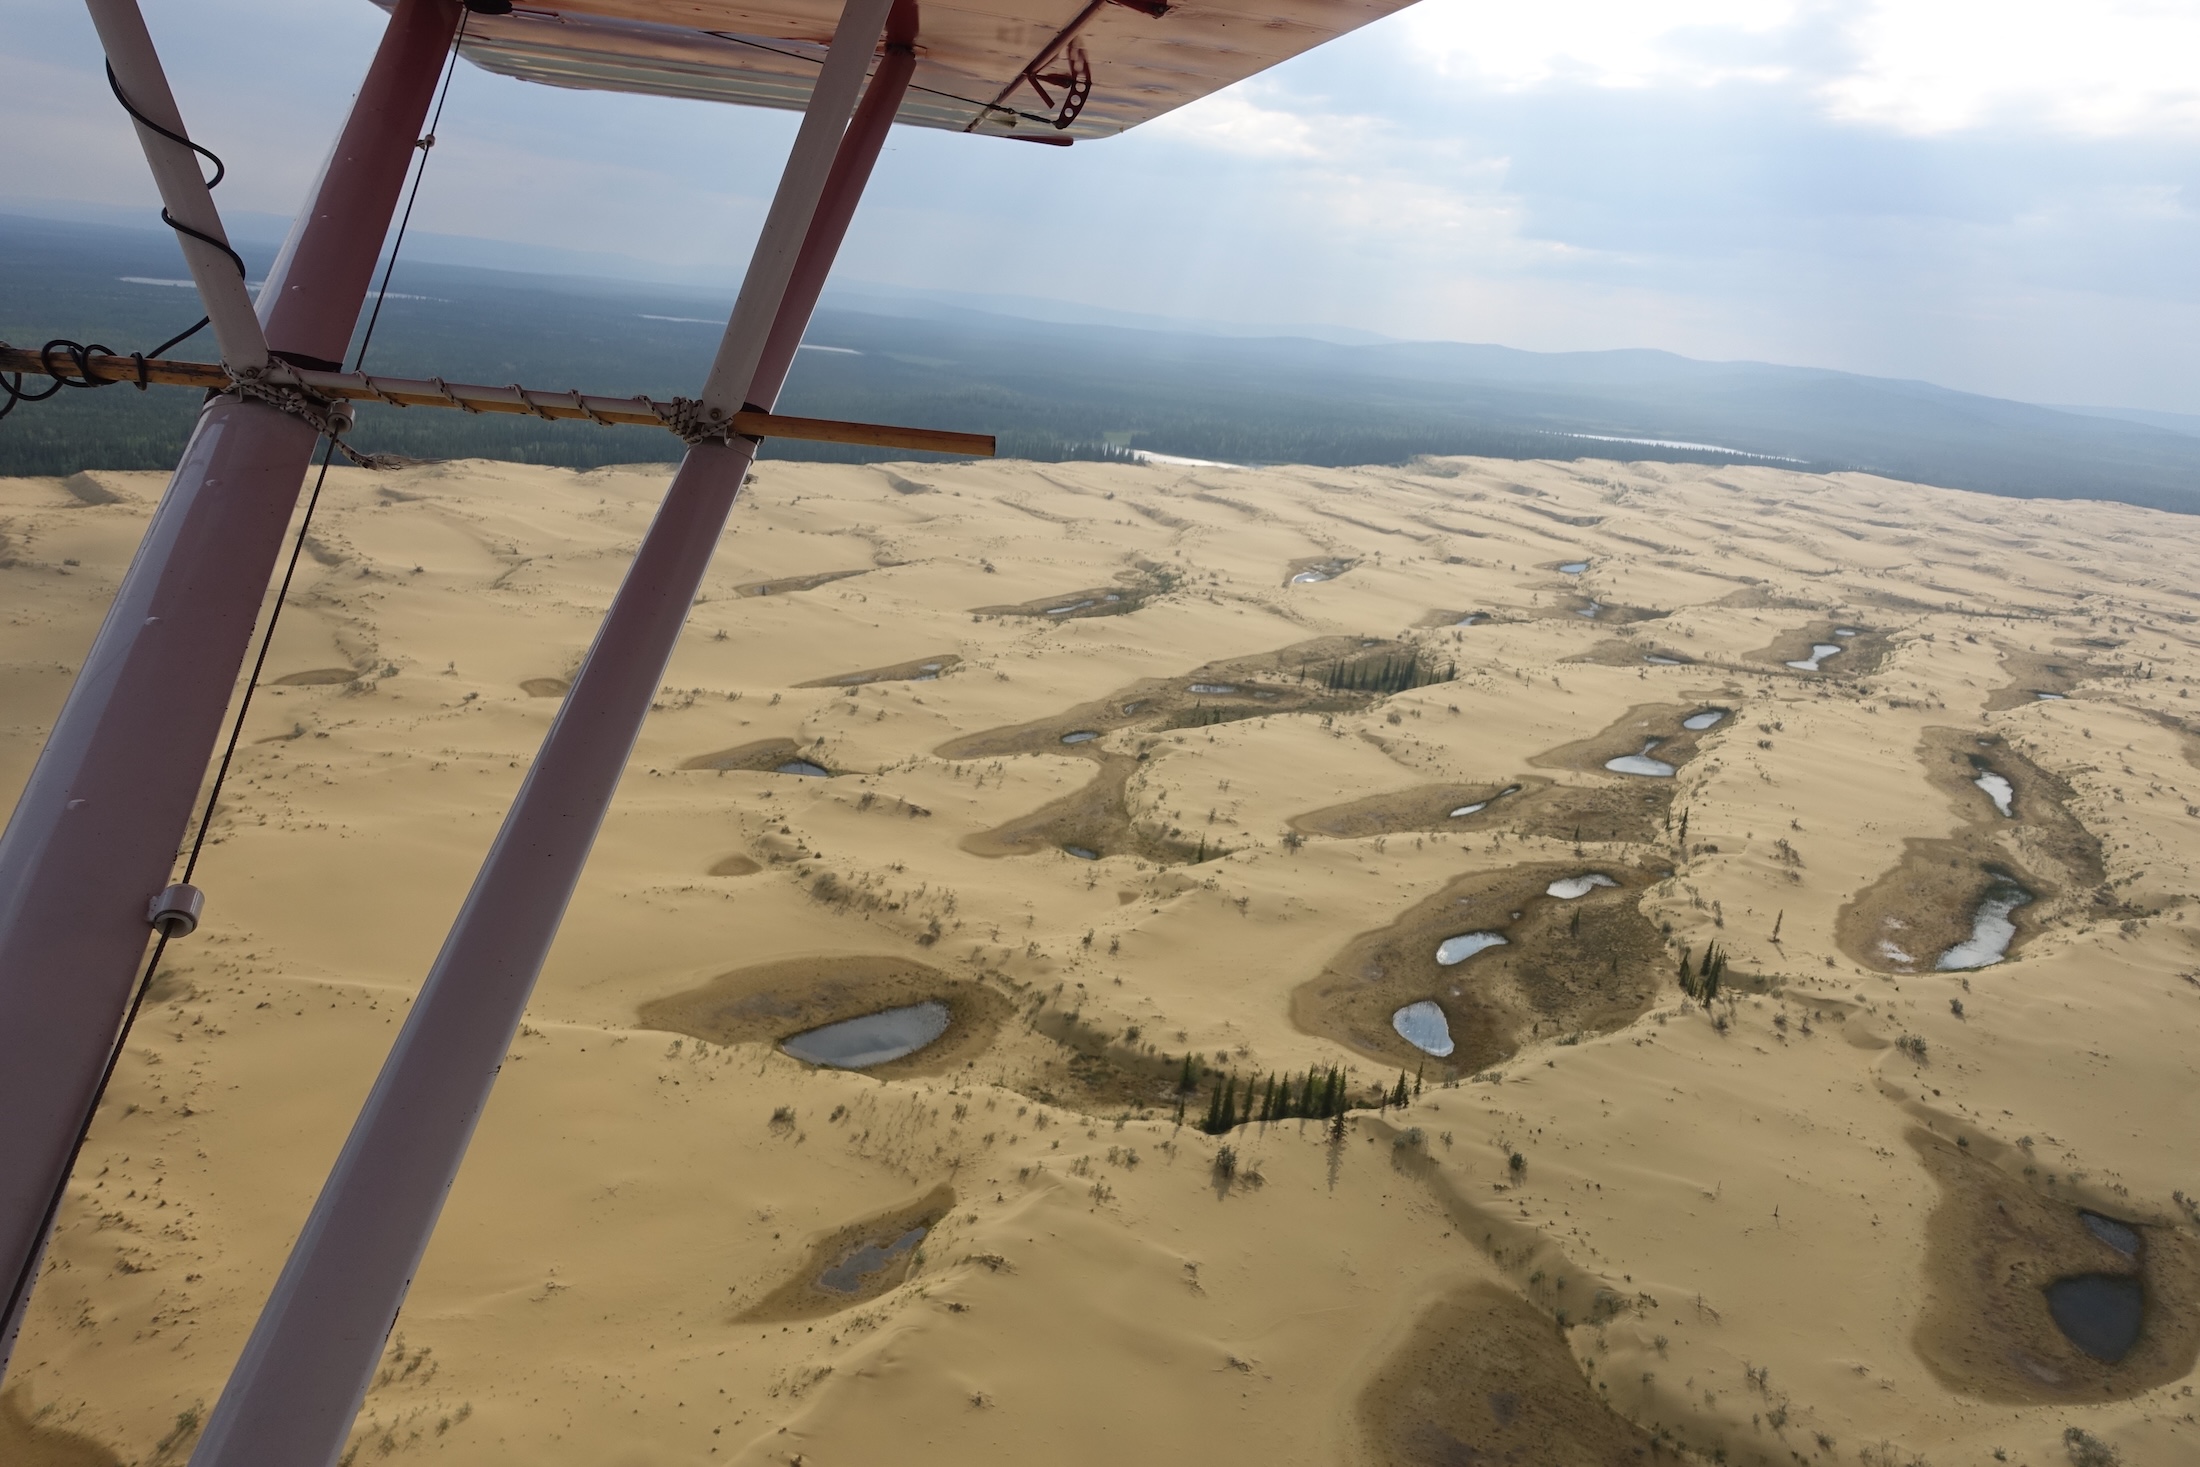 Sand dunes are studded with small ponds and a few trees in a photo taken from a small plane, whose struts are visible in the photo. In the distance is a green forest.